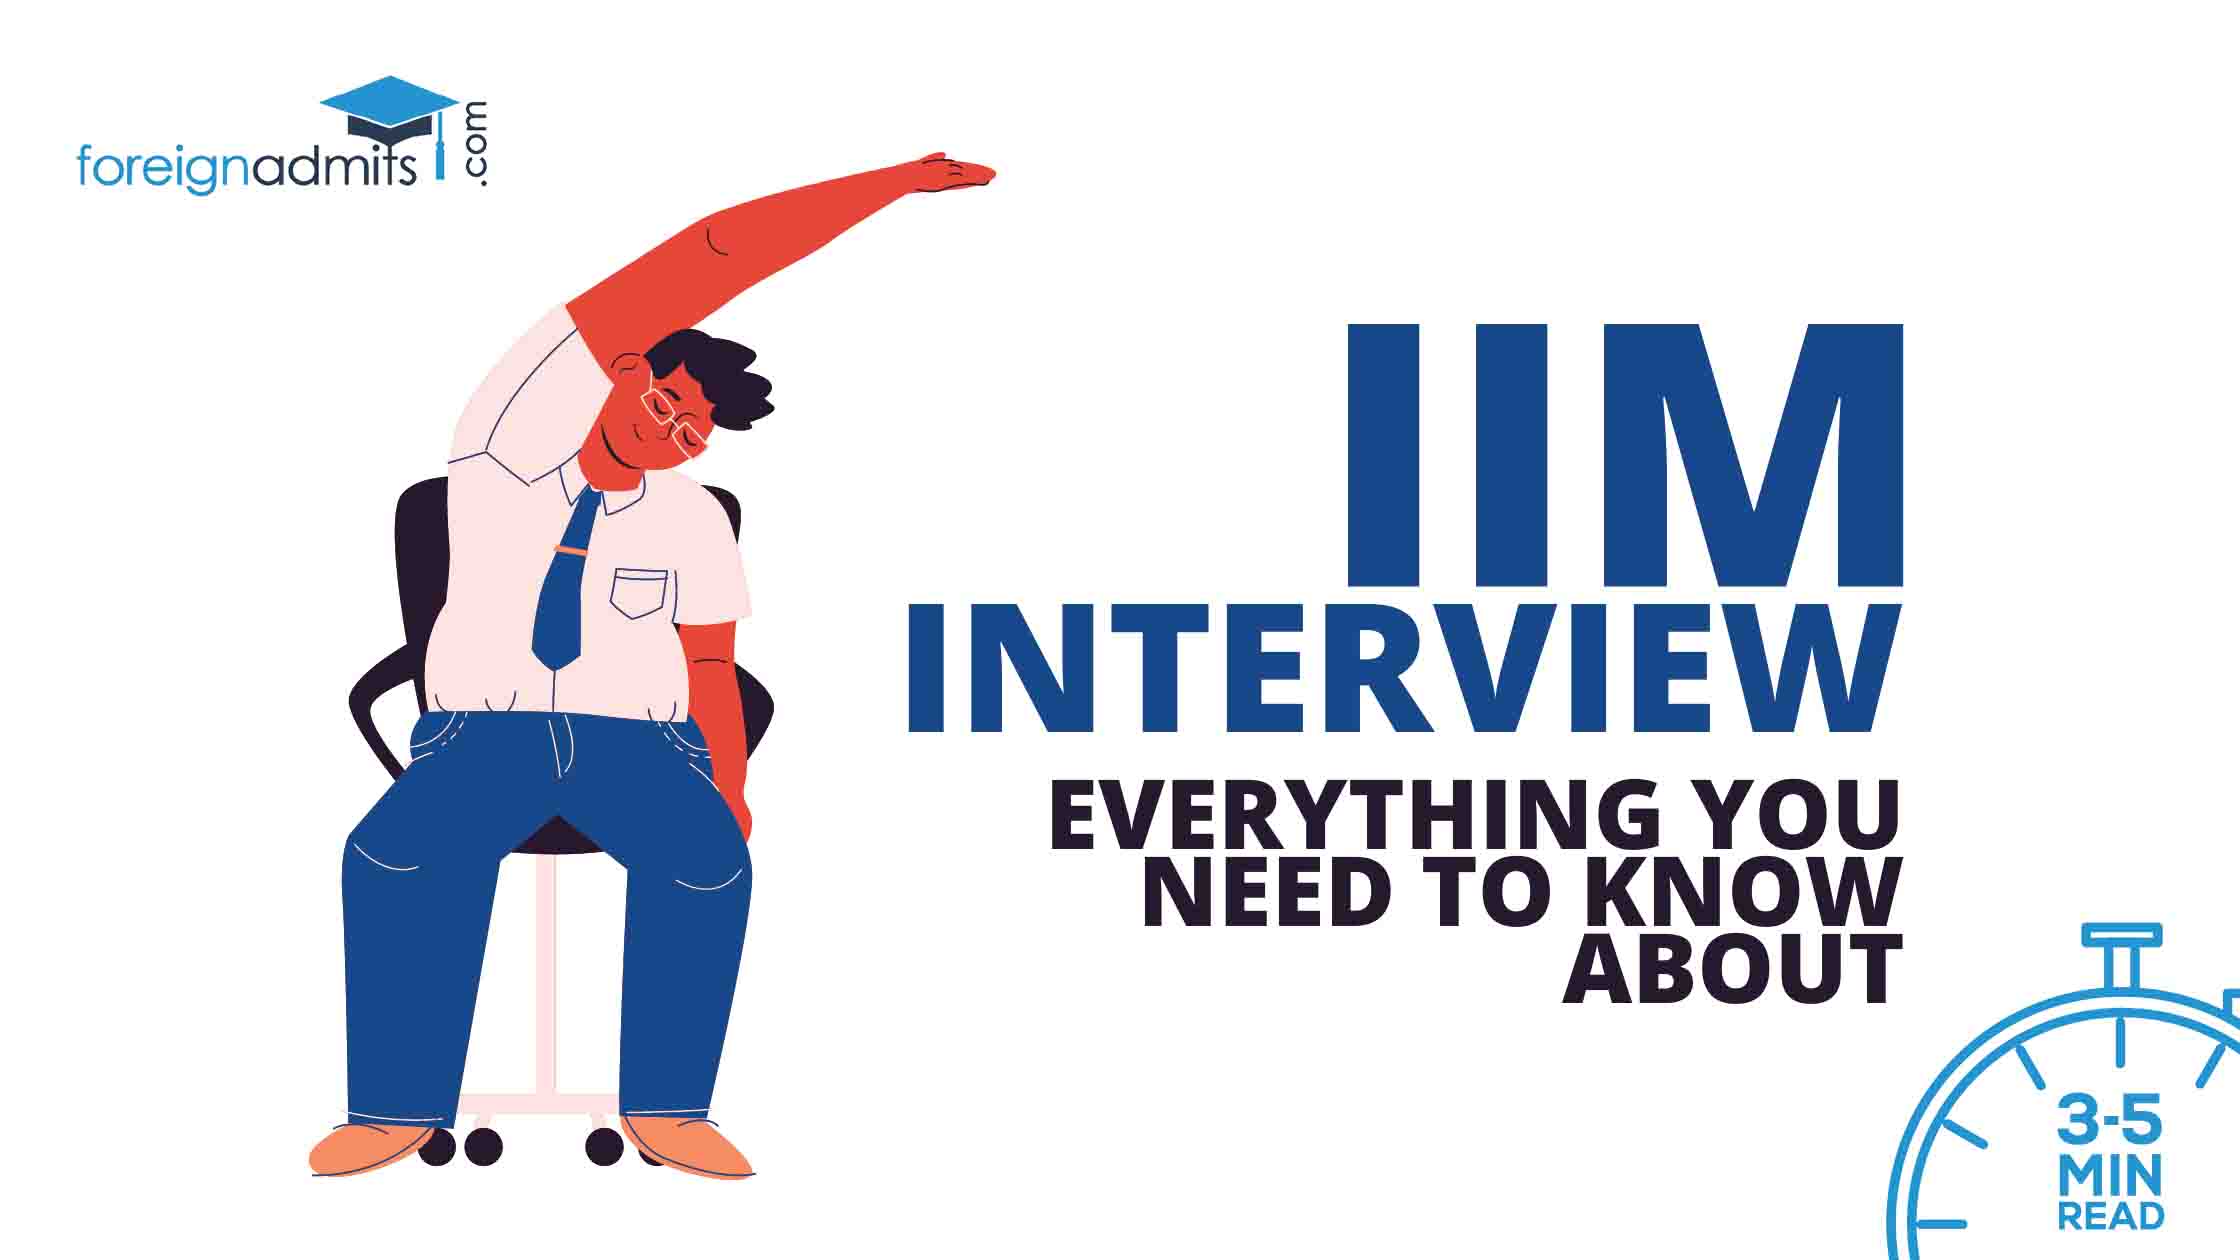 Everything You Need to Know About an IIM Interview